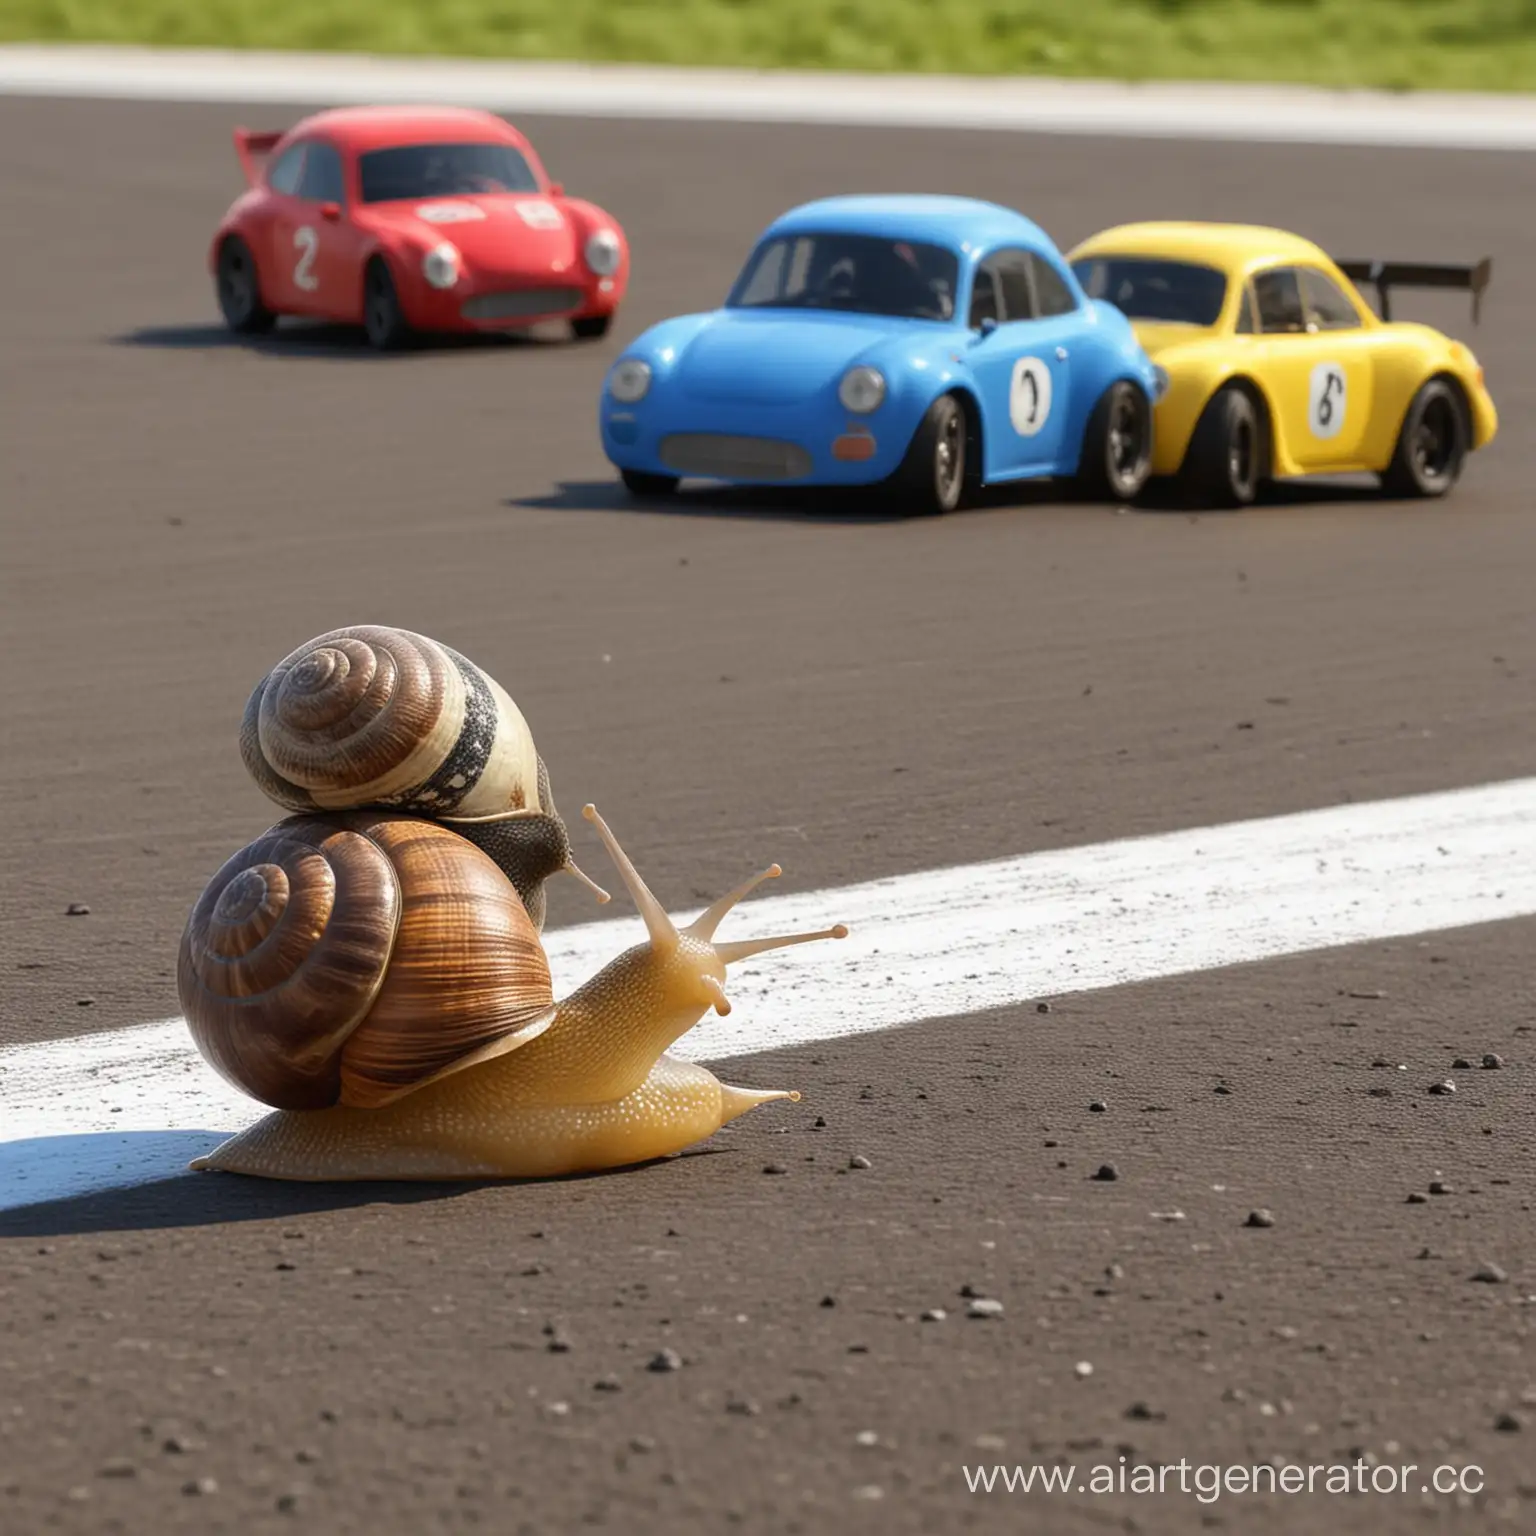 snail finishes first on the racetrack with other race cars